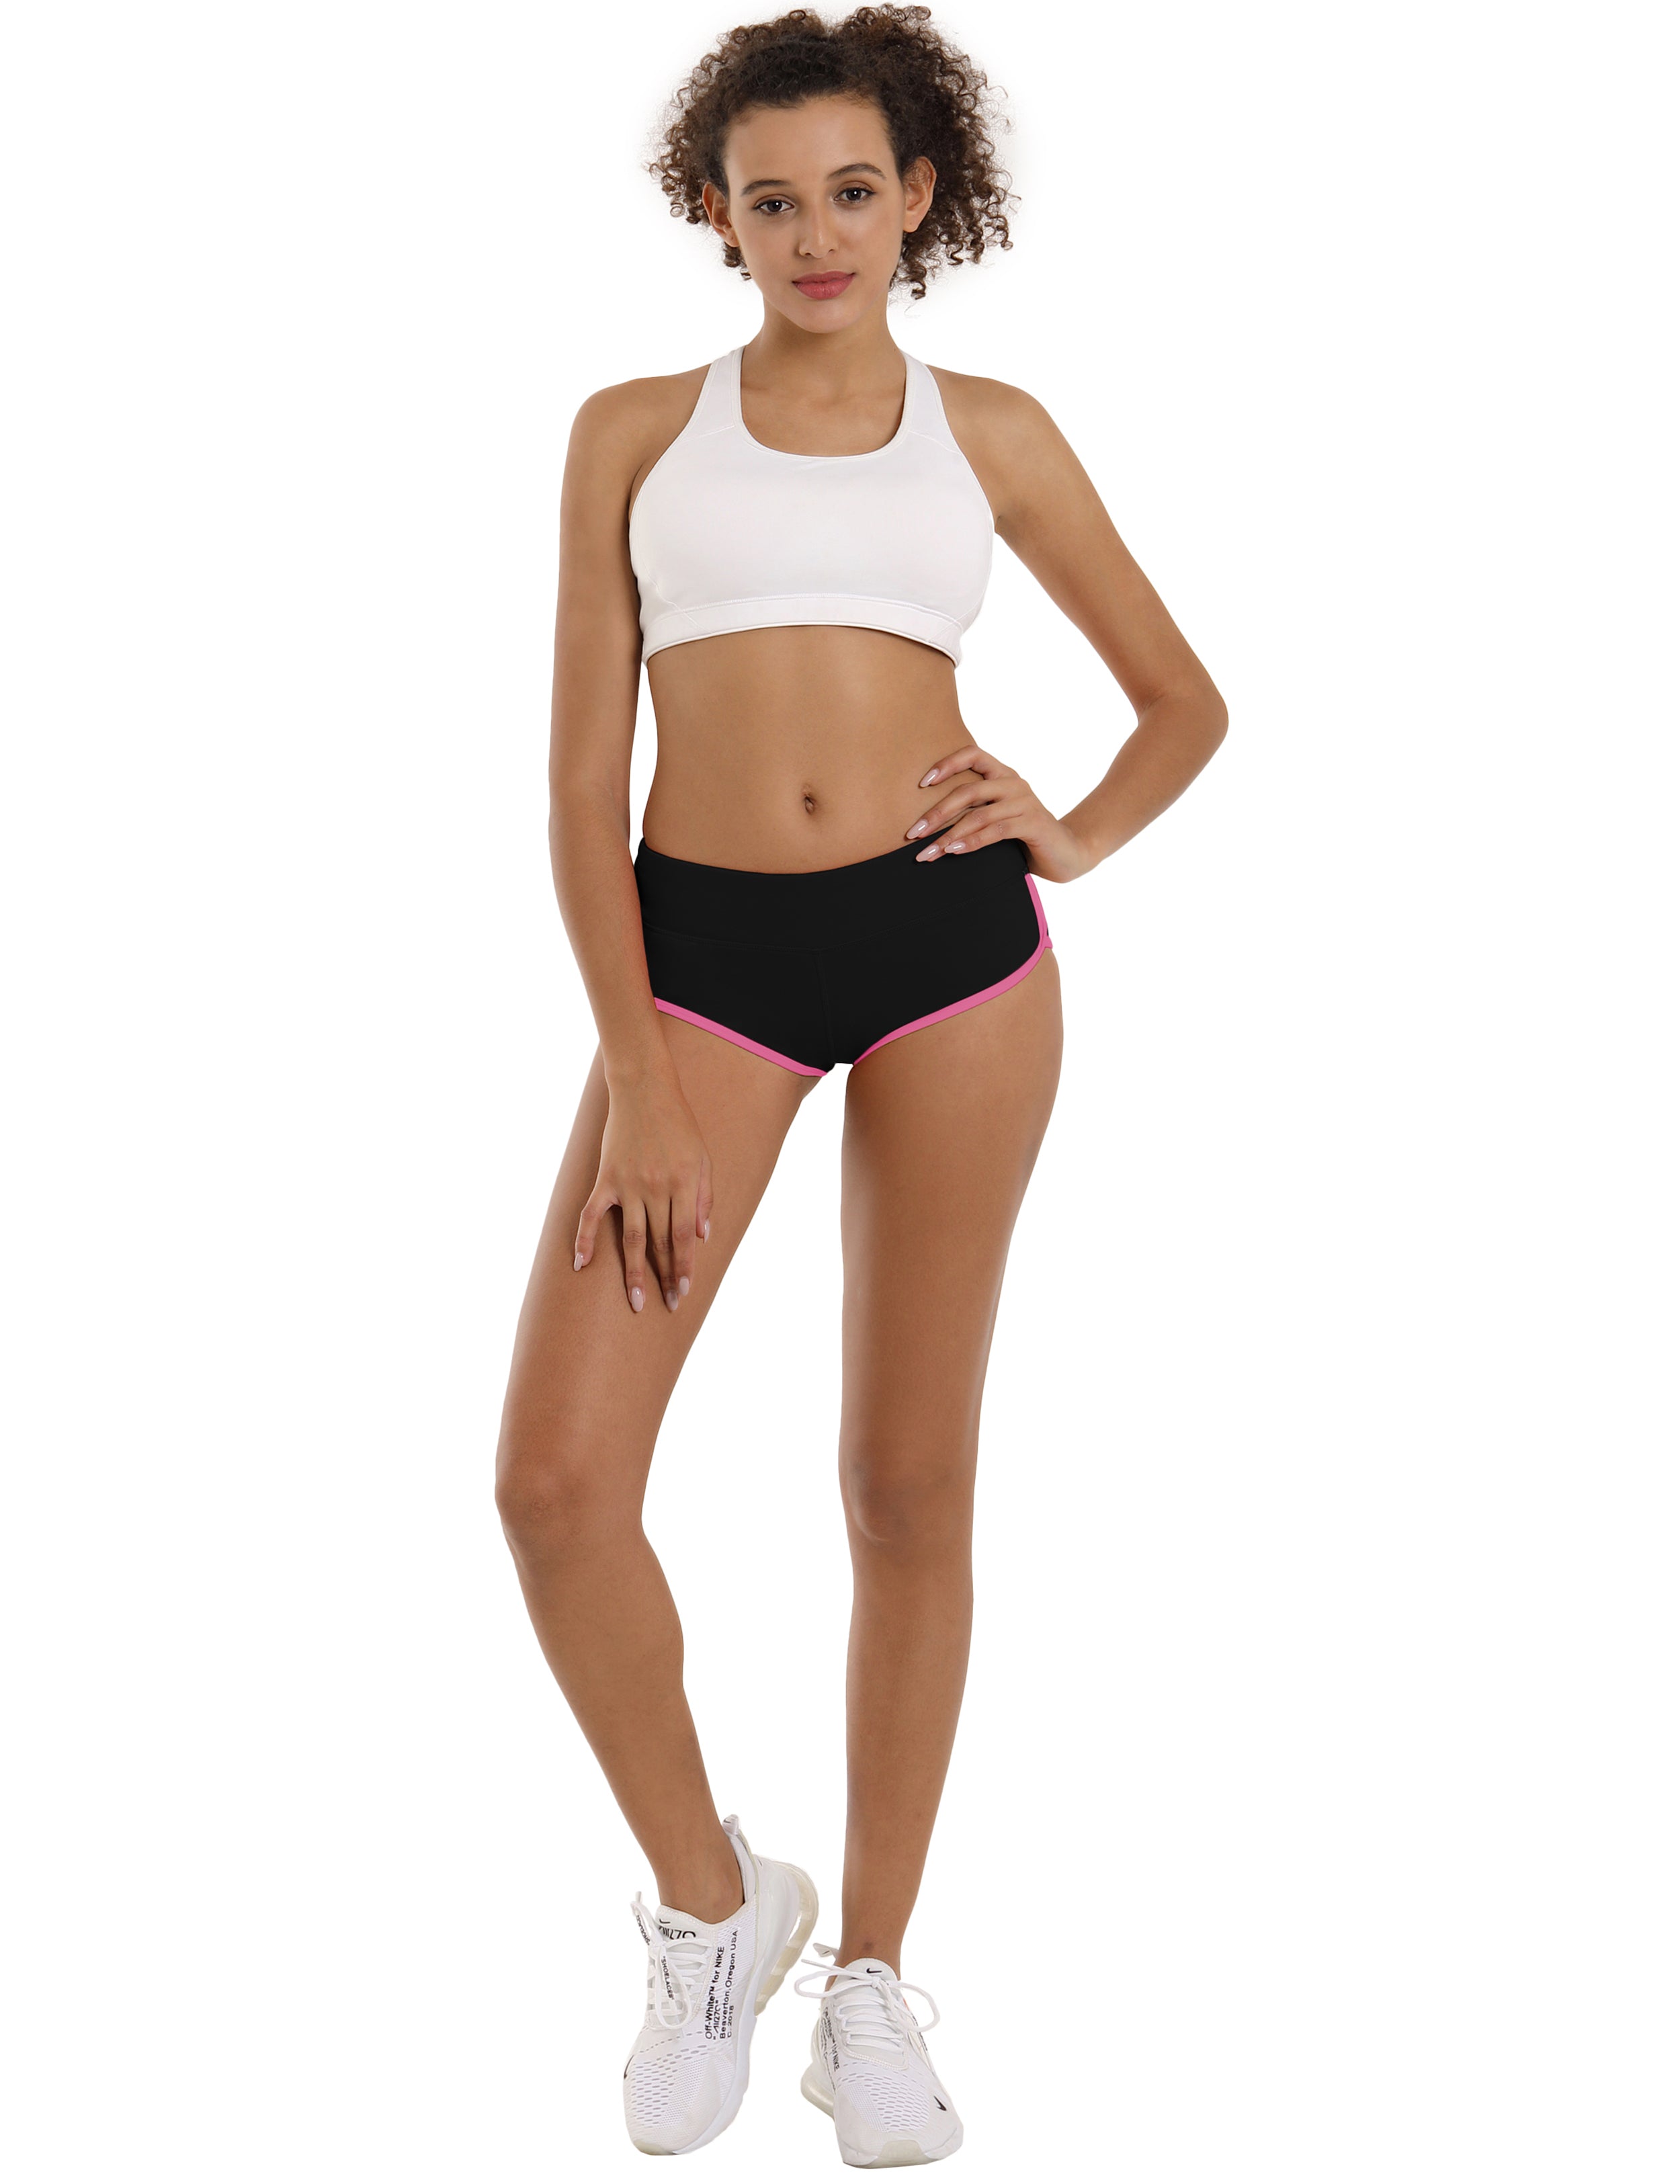 Sexy Booty Yoga Shorts black_pink Sleek, soft, smooth and totally comfortable: our newest sexy style is here. Softest-ever fabric High elasticity High density 4-way stretch Fabric doesn't attract lint easily No see-through Moisture-wicking Machine wash 75%Nylon/25%Spandex